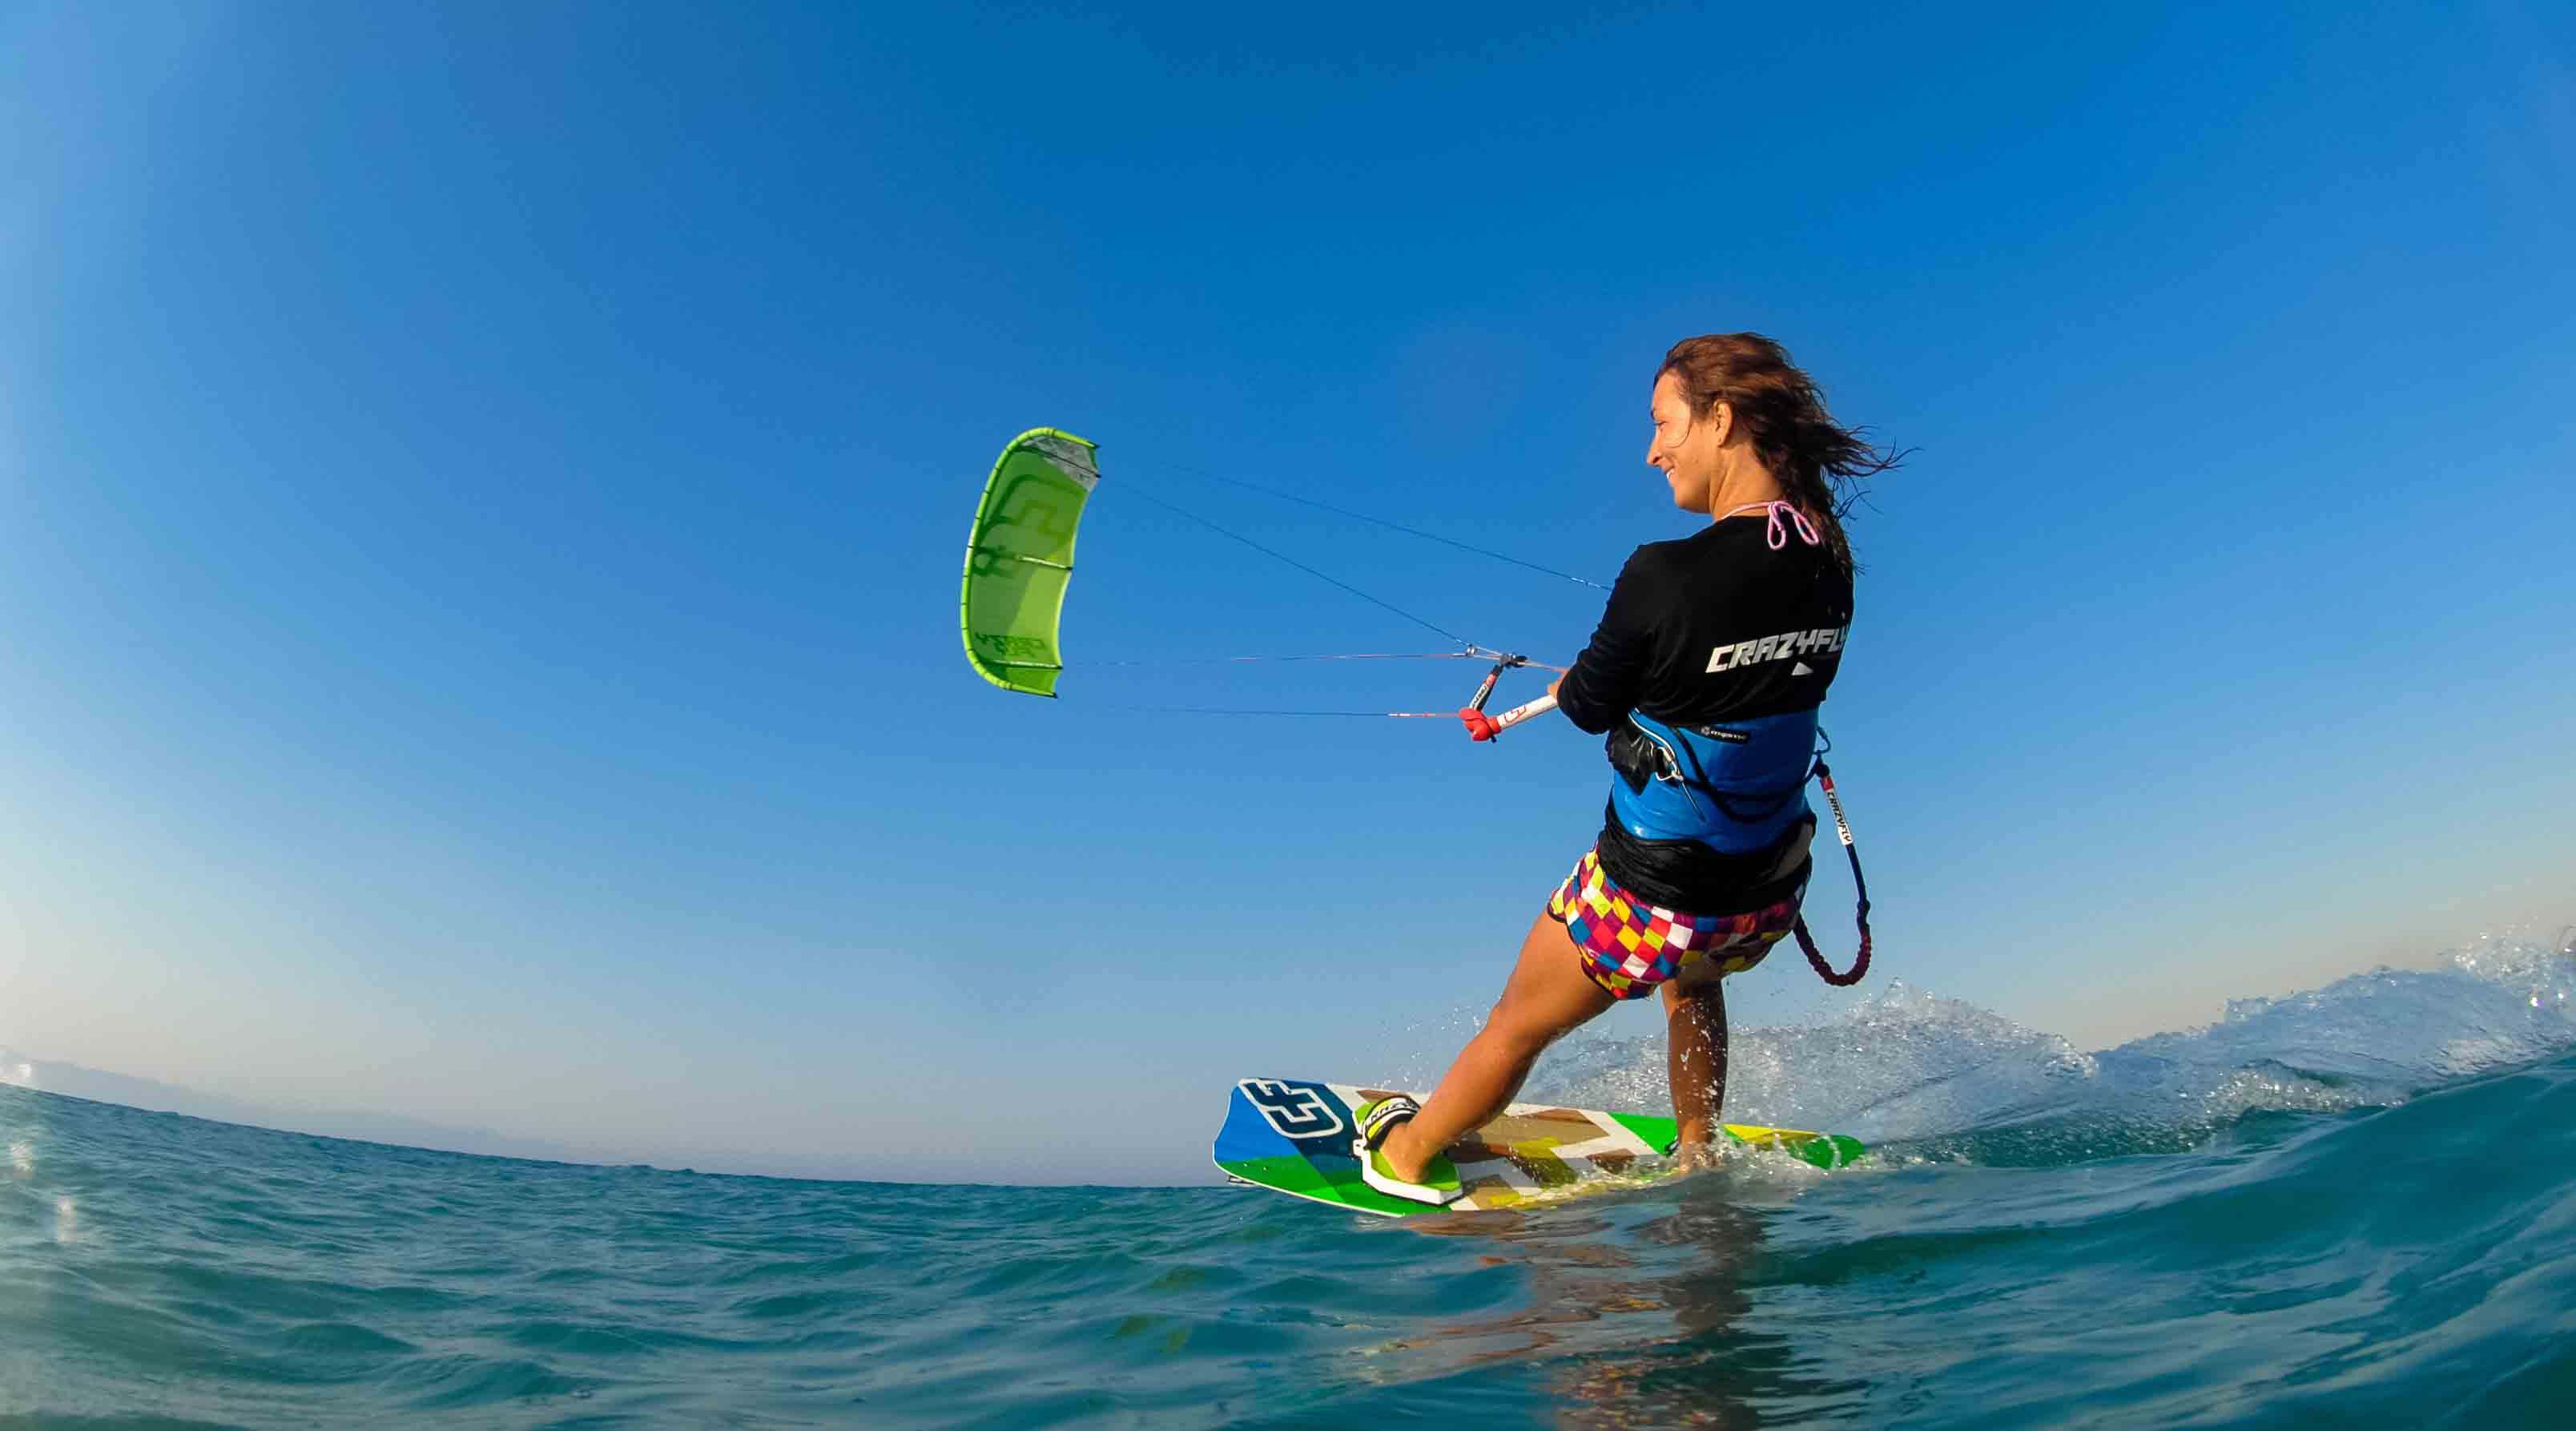 things to do in Cape Verde: Go Kite Surfing